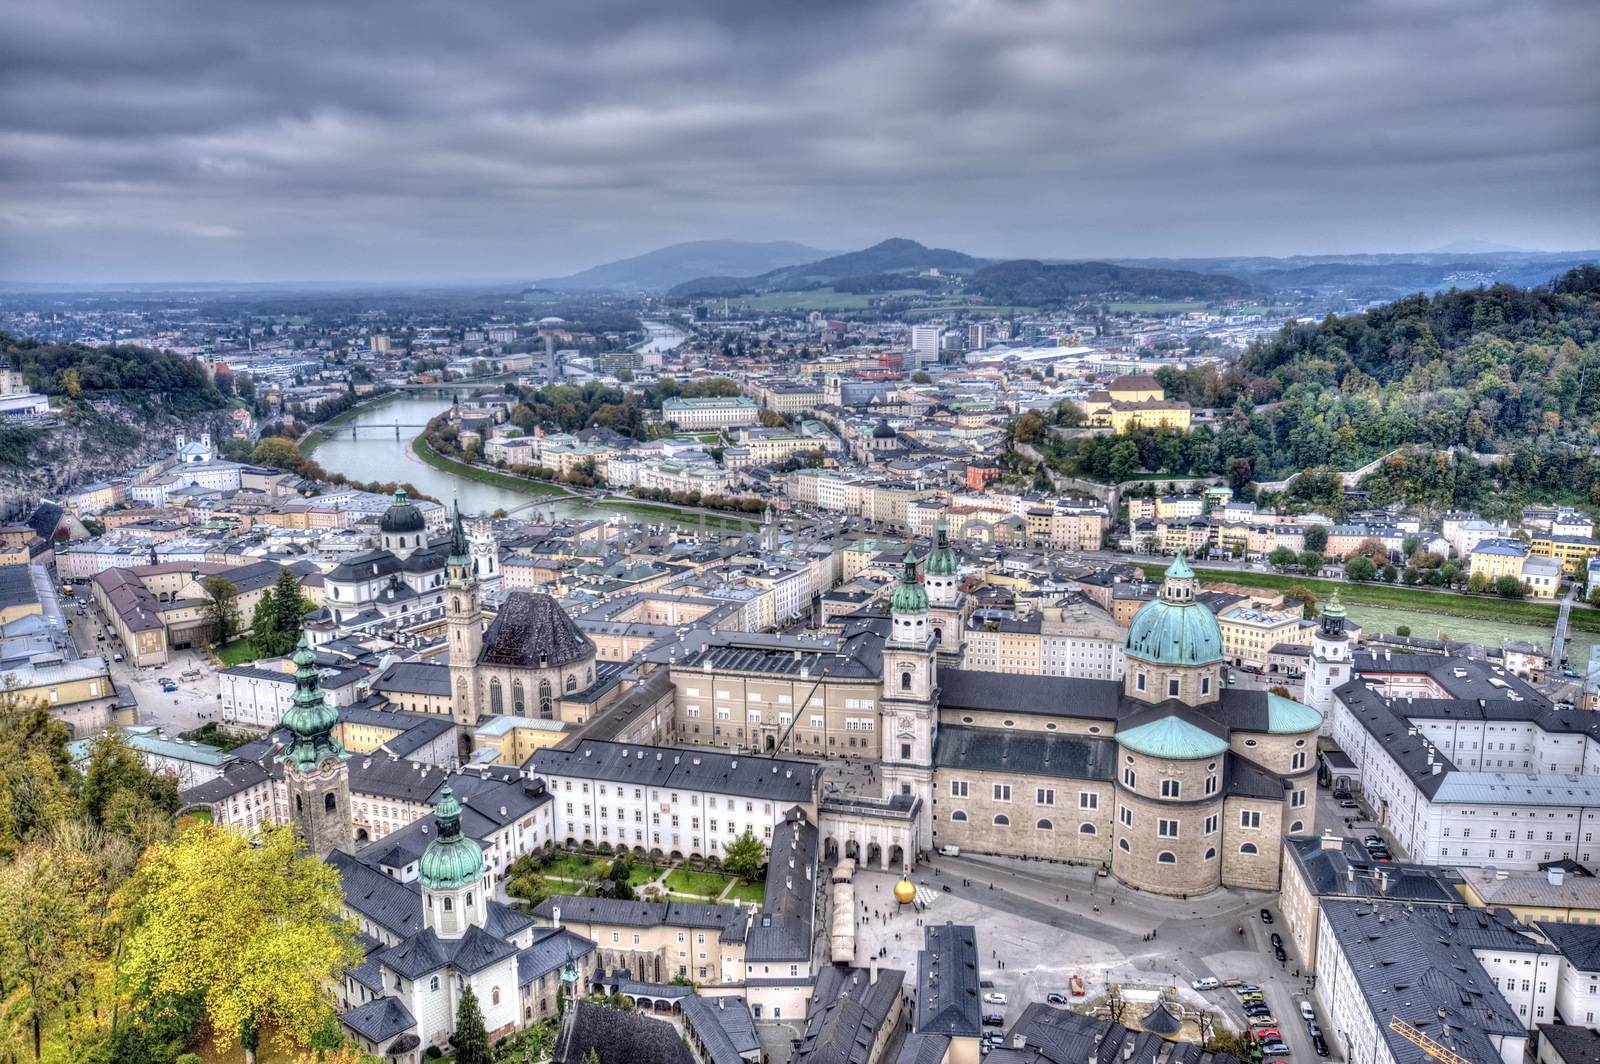 City of Salzburg from the fortress by anderm